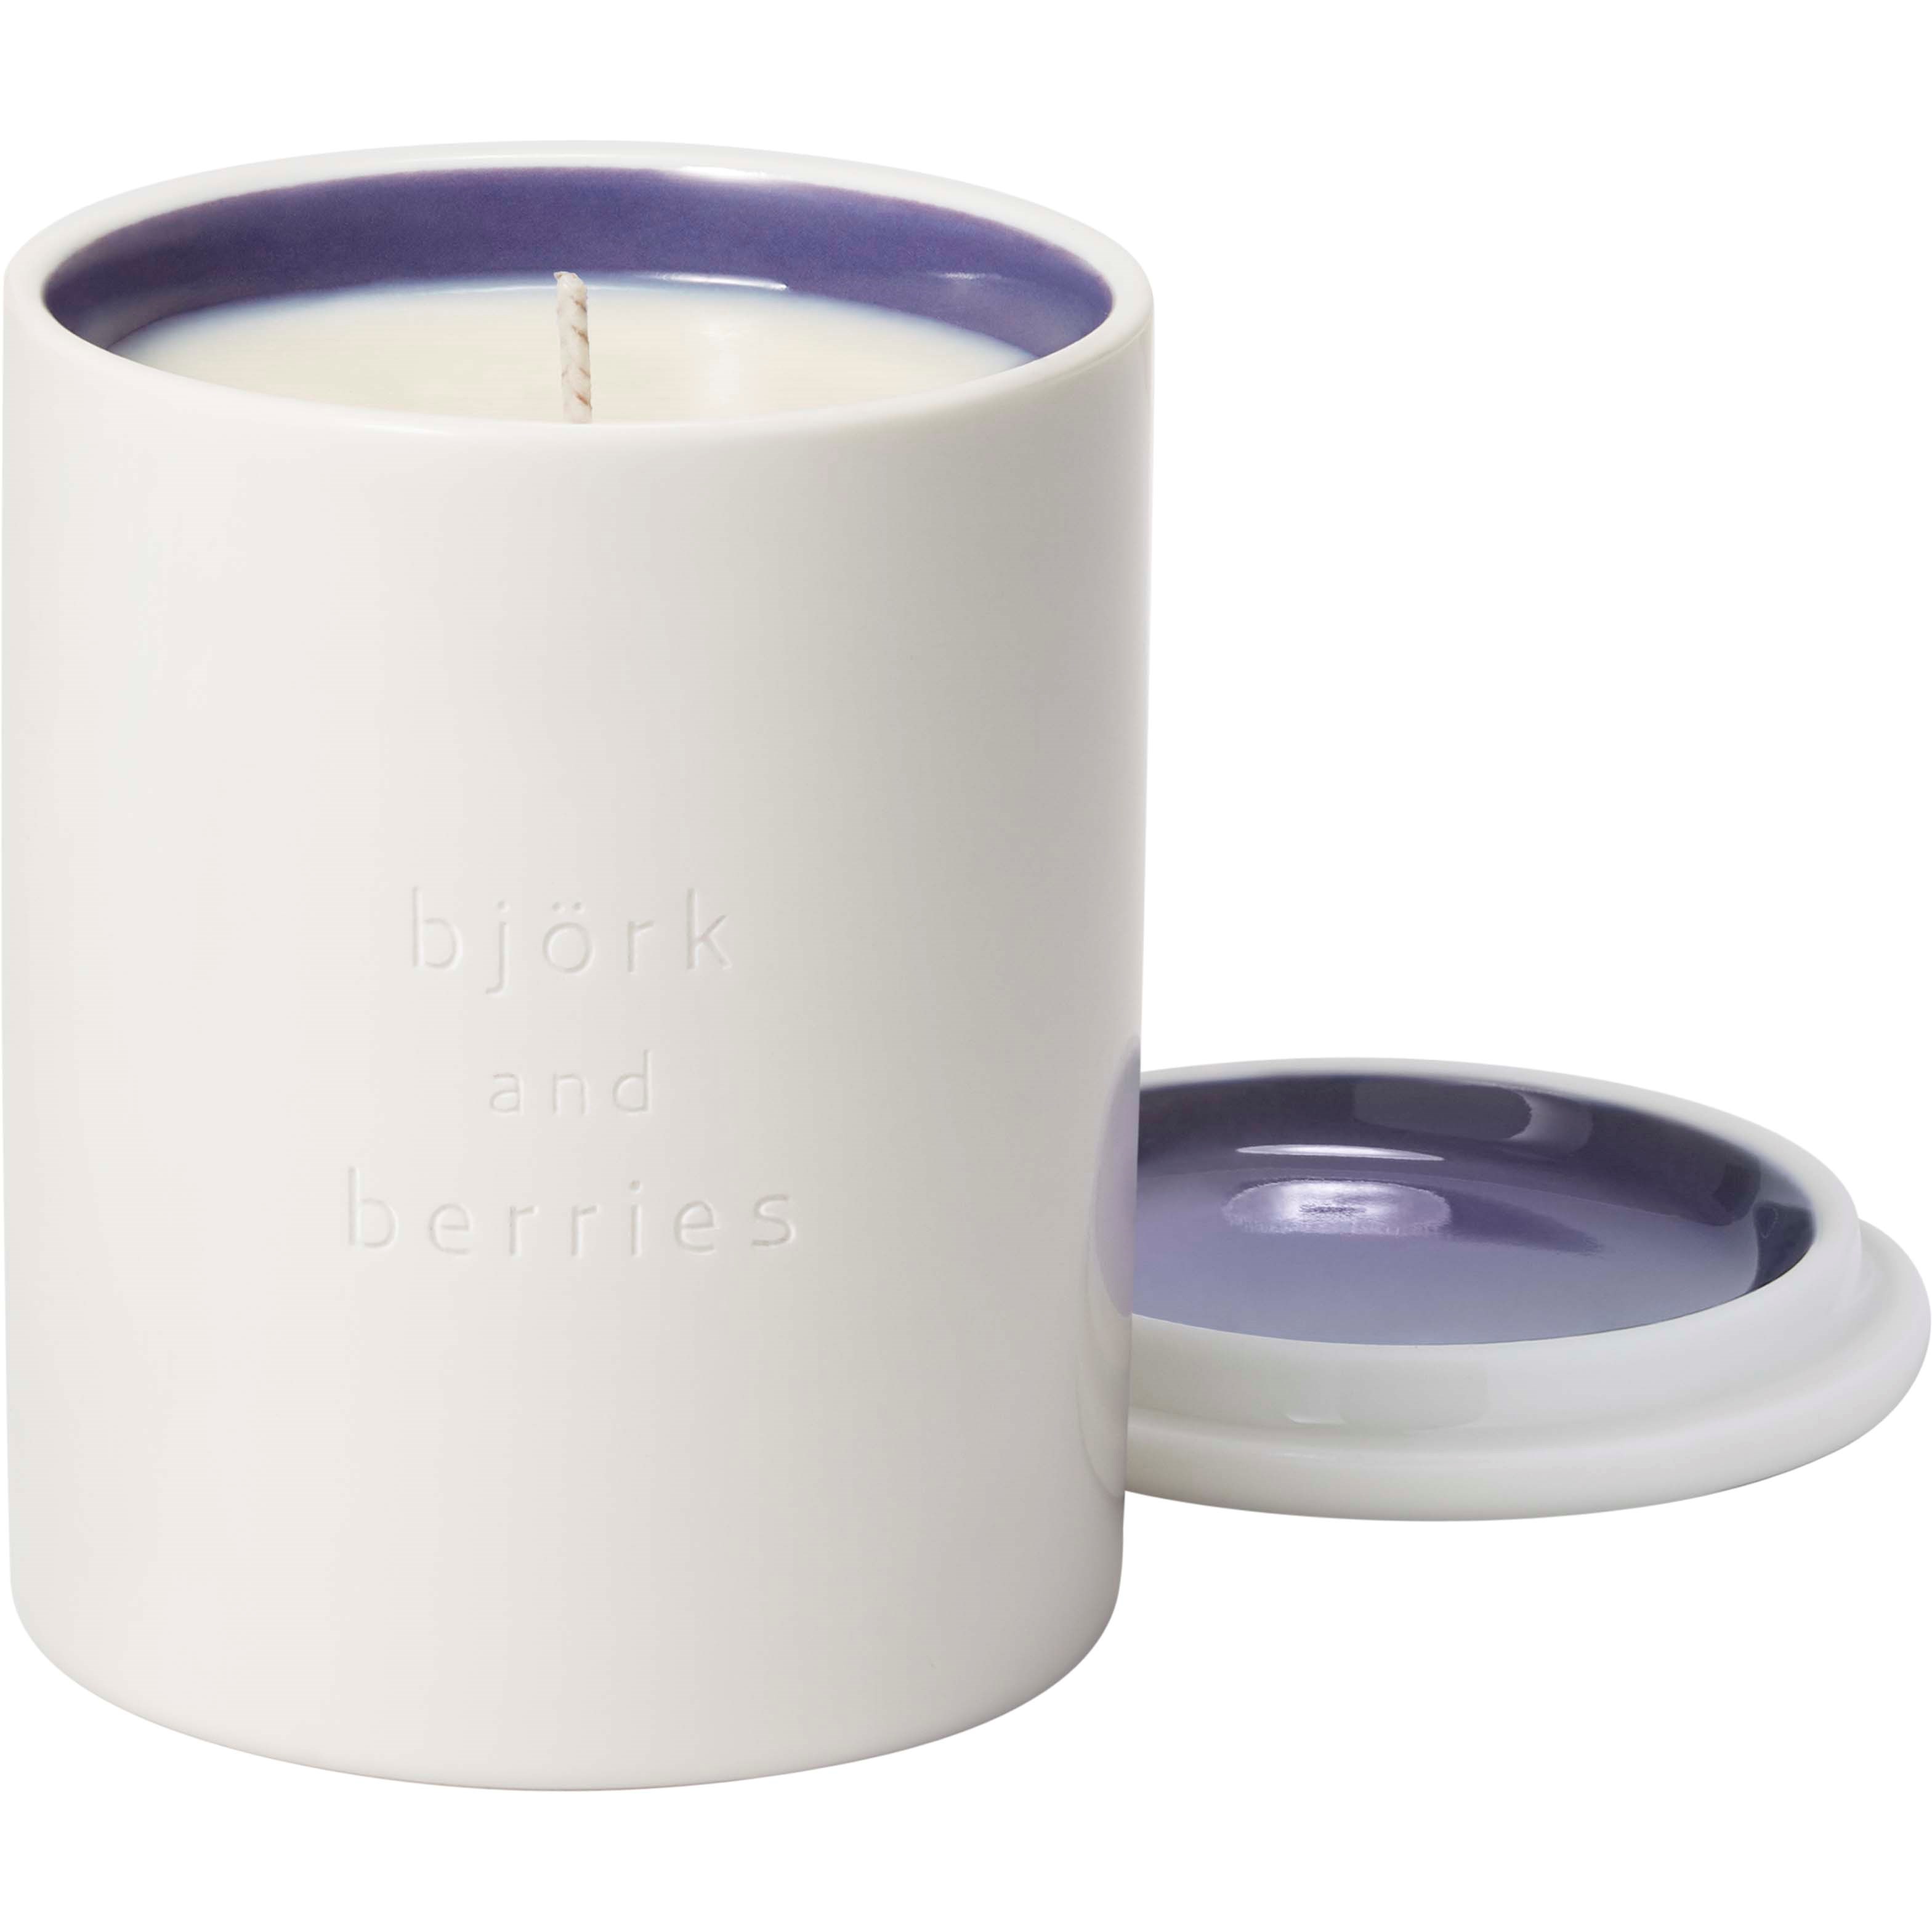 Björk and Berries Måne Scented Candle 240 g